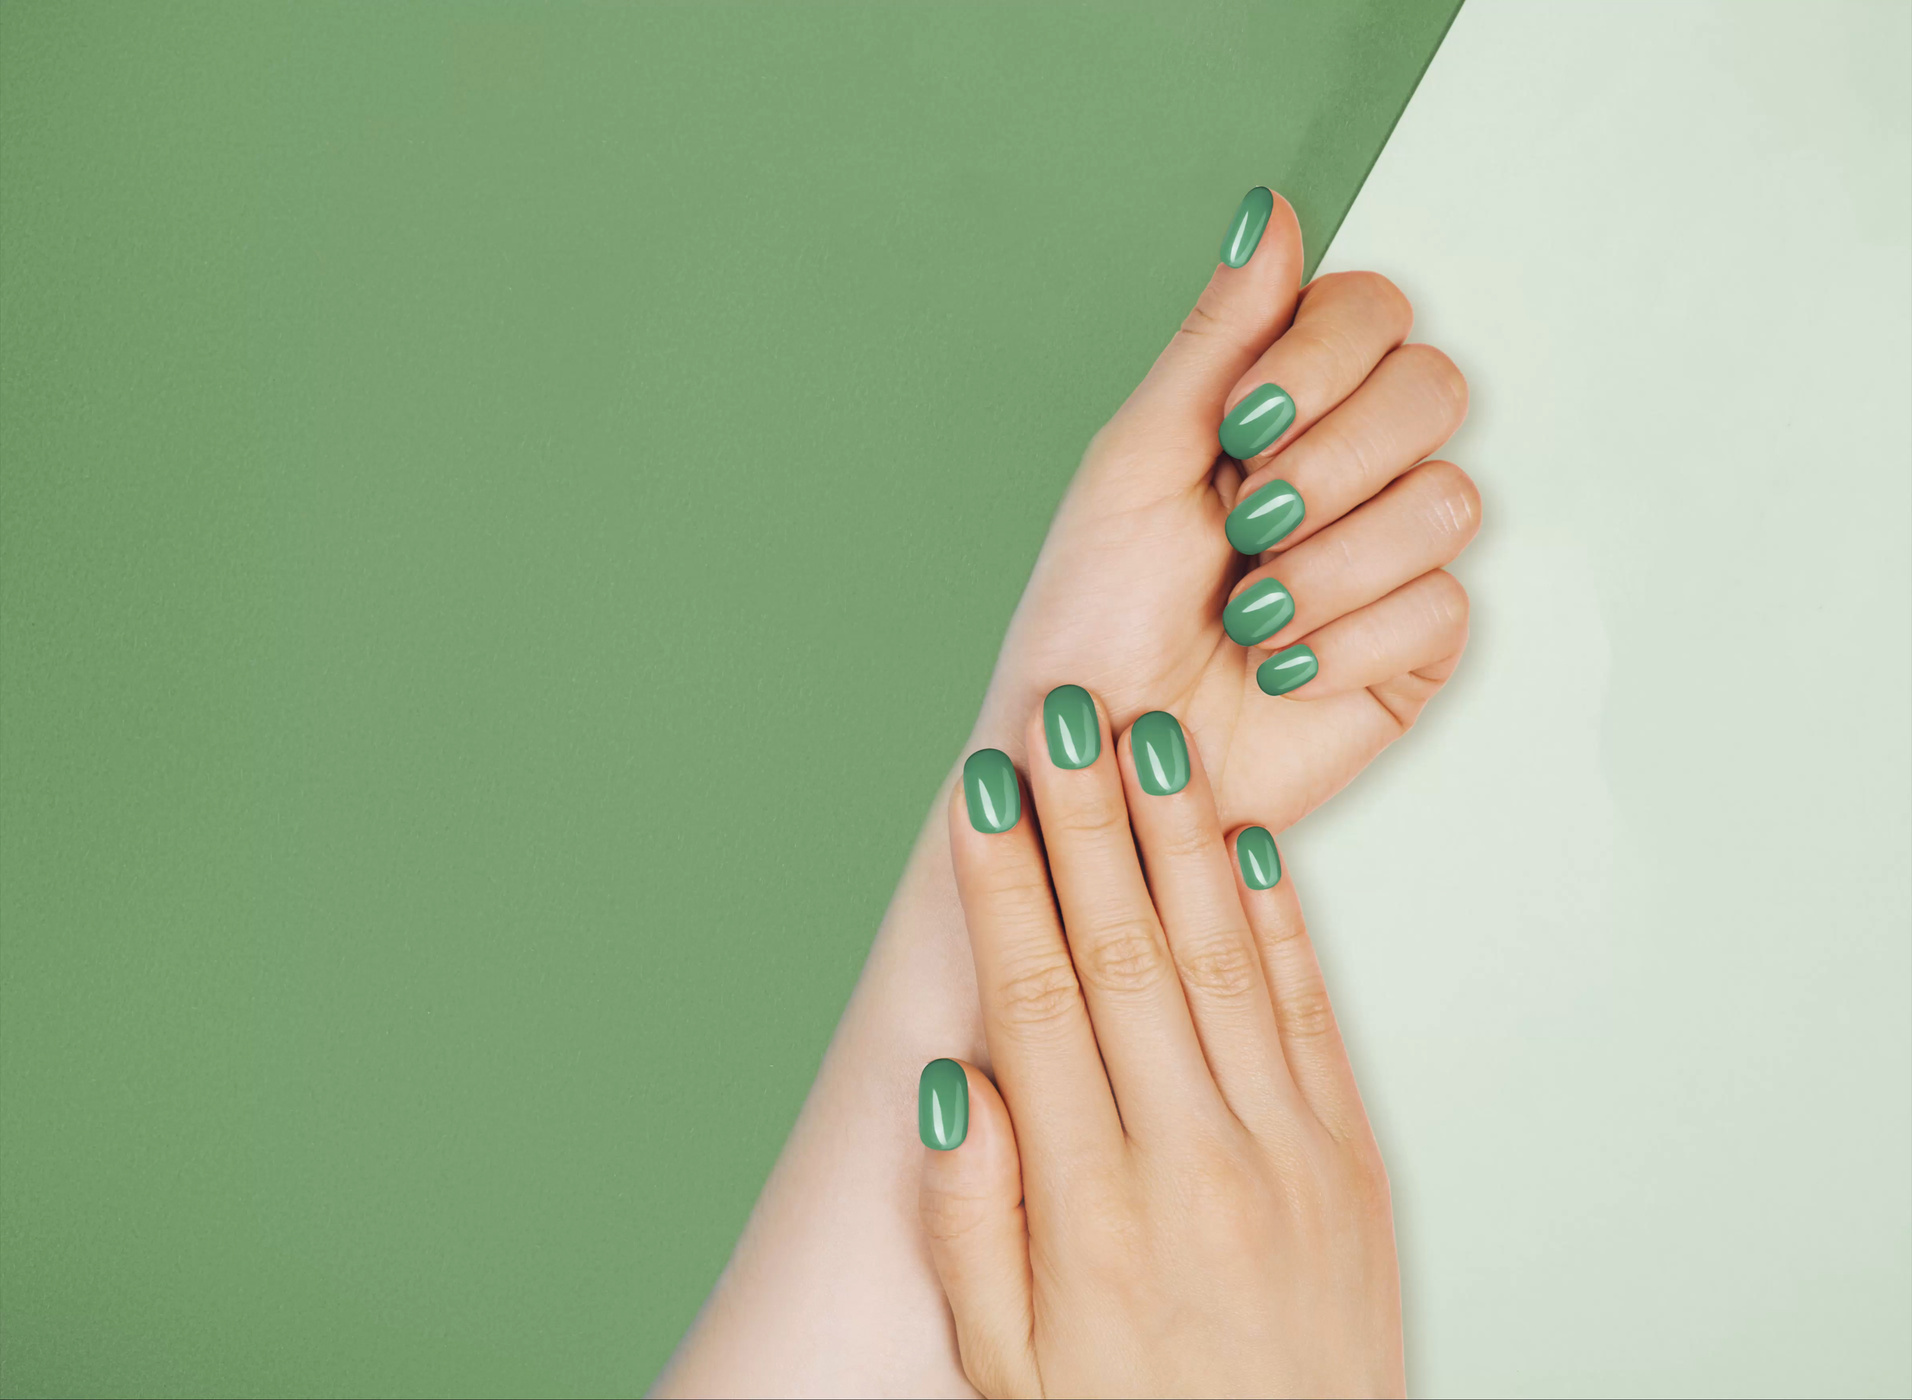 Closeup of hands of a young woman with green manicure on nails